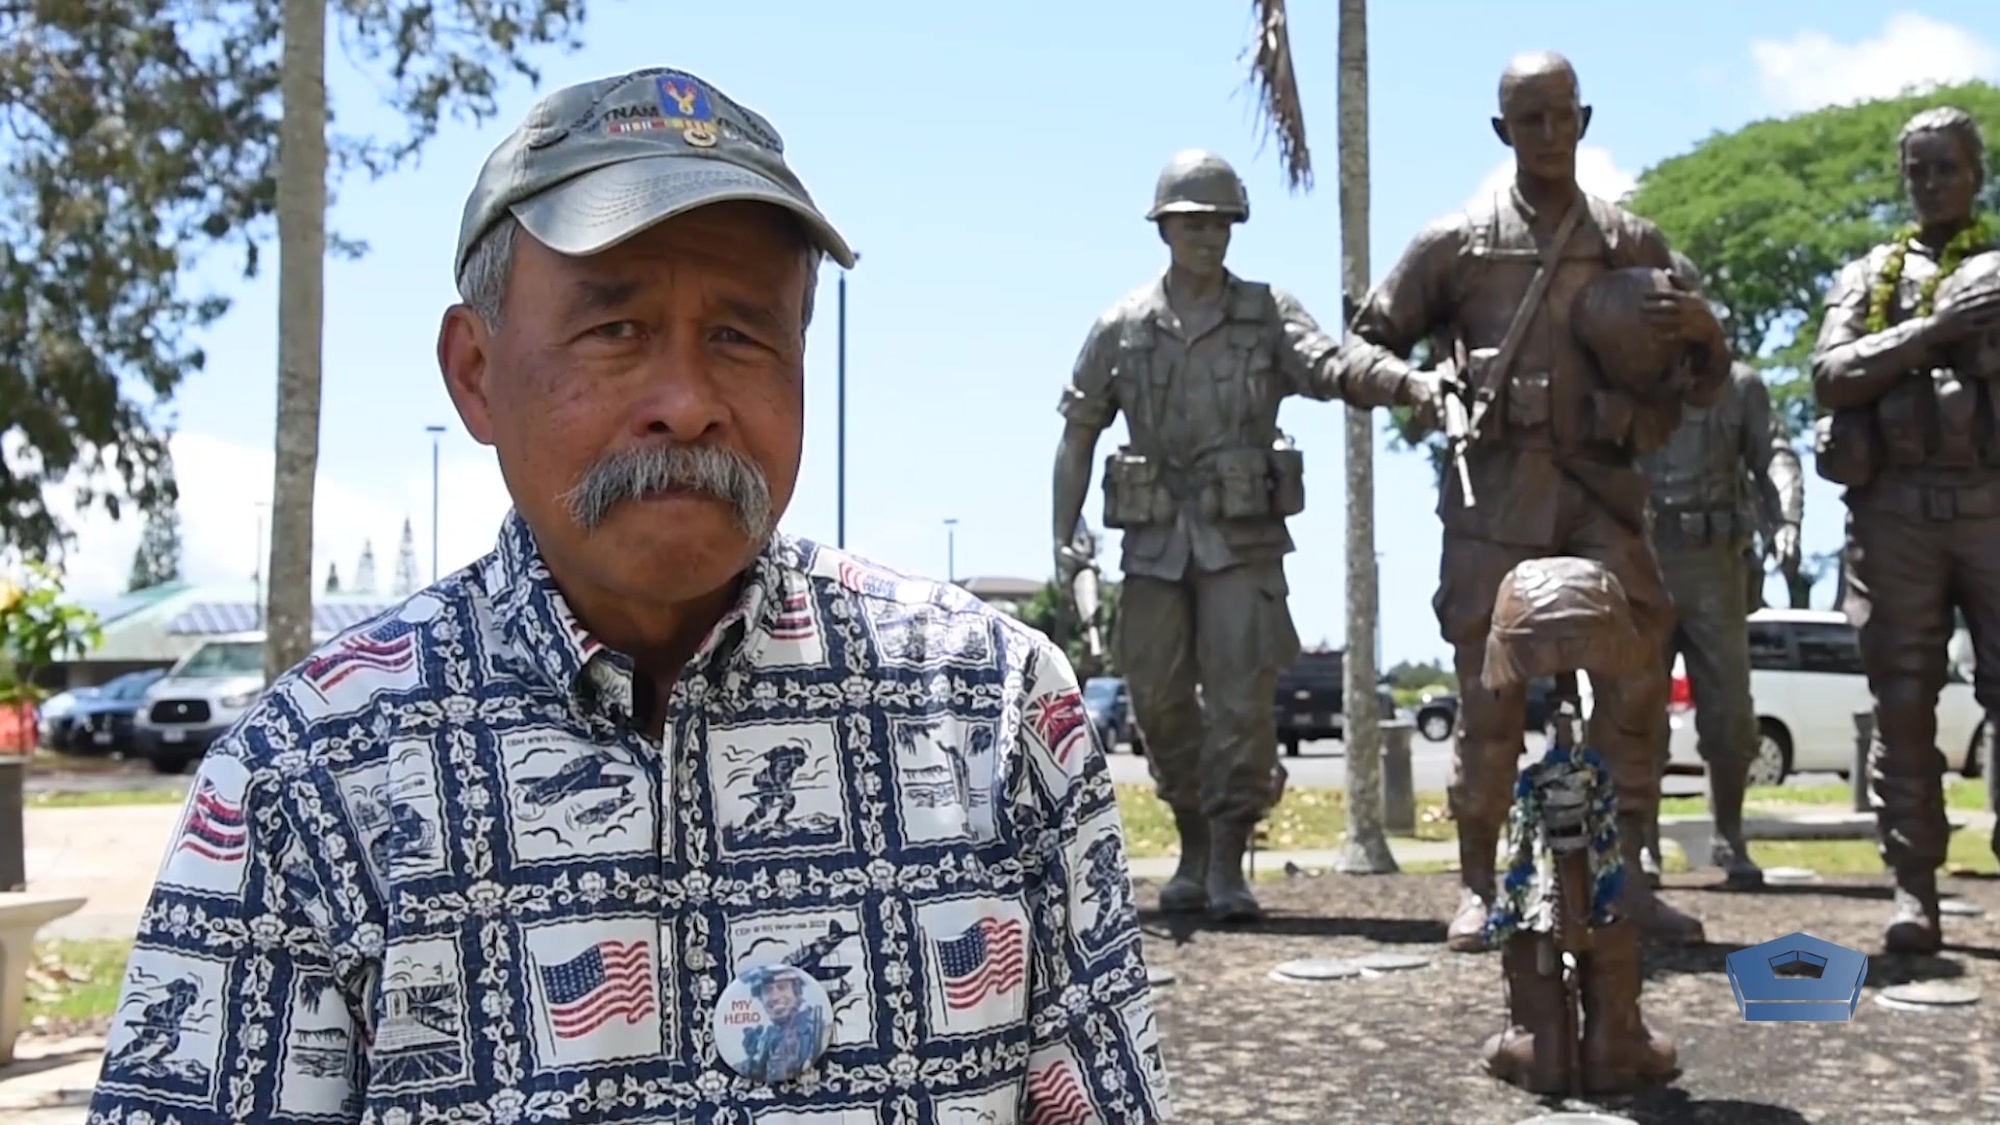 Allen Kale’iolani Hoe, a Vietnam veteran and former civilian aide to the secretary of the Army, shares how a Vietnam-era flag became a reminder of purpose for generations of combat soldiers. That spirit continues to drive this Hawaii native and his family toward generations of service to the military. 

Video by Air Force Staff Sgt. Elizabeth Taranto